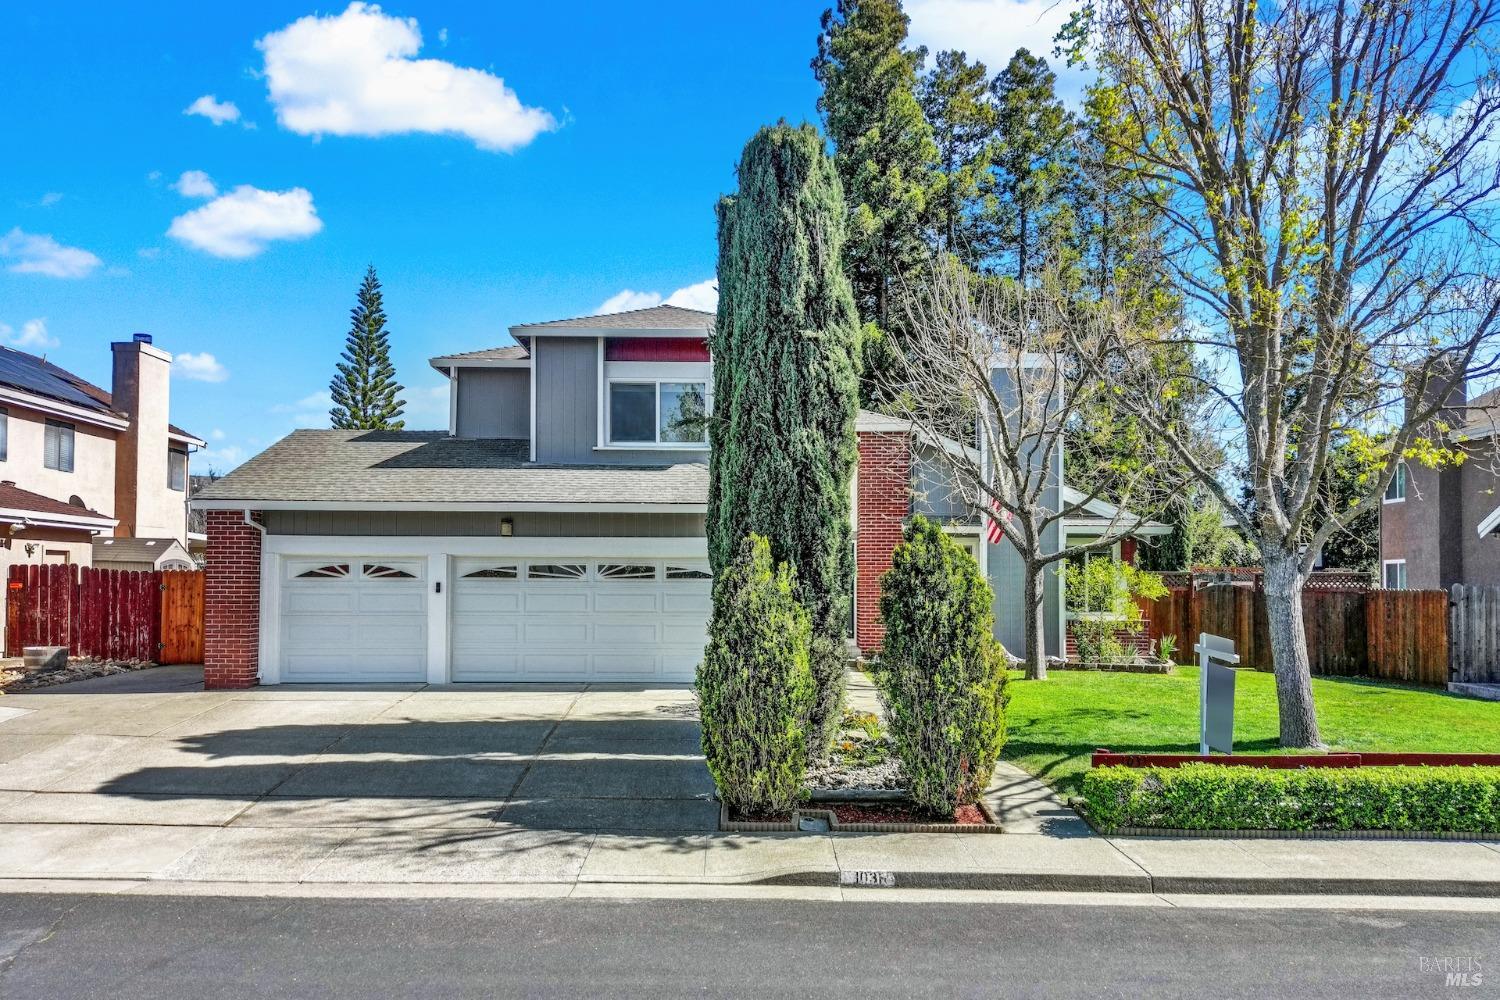 Photo of 1031 Hickory Ave in Fairfield, CA